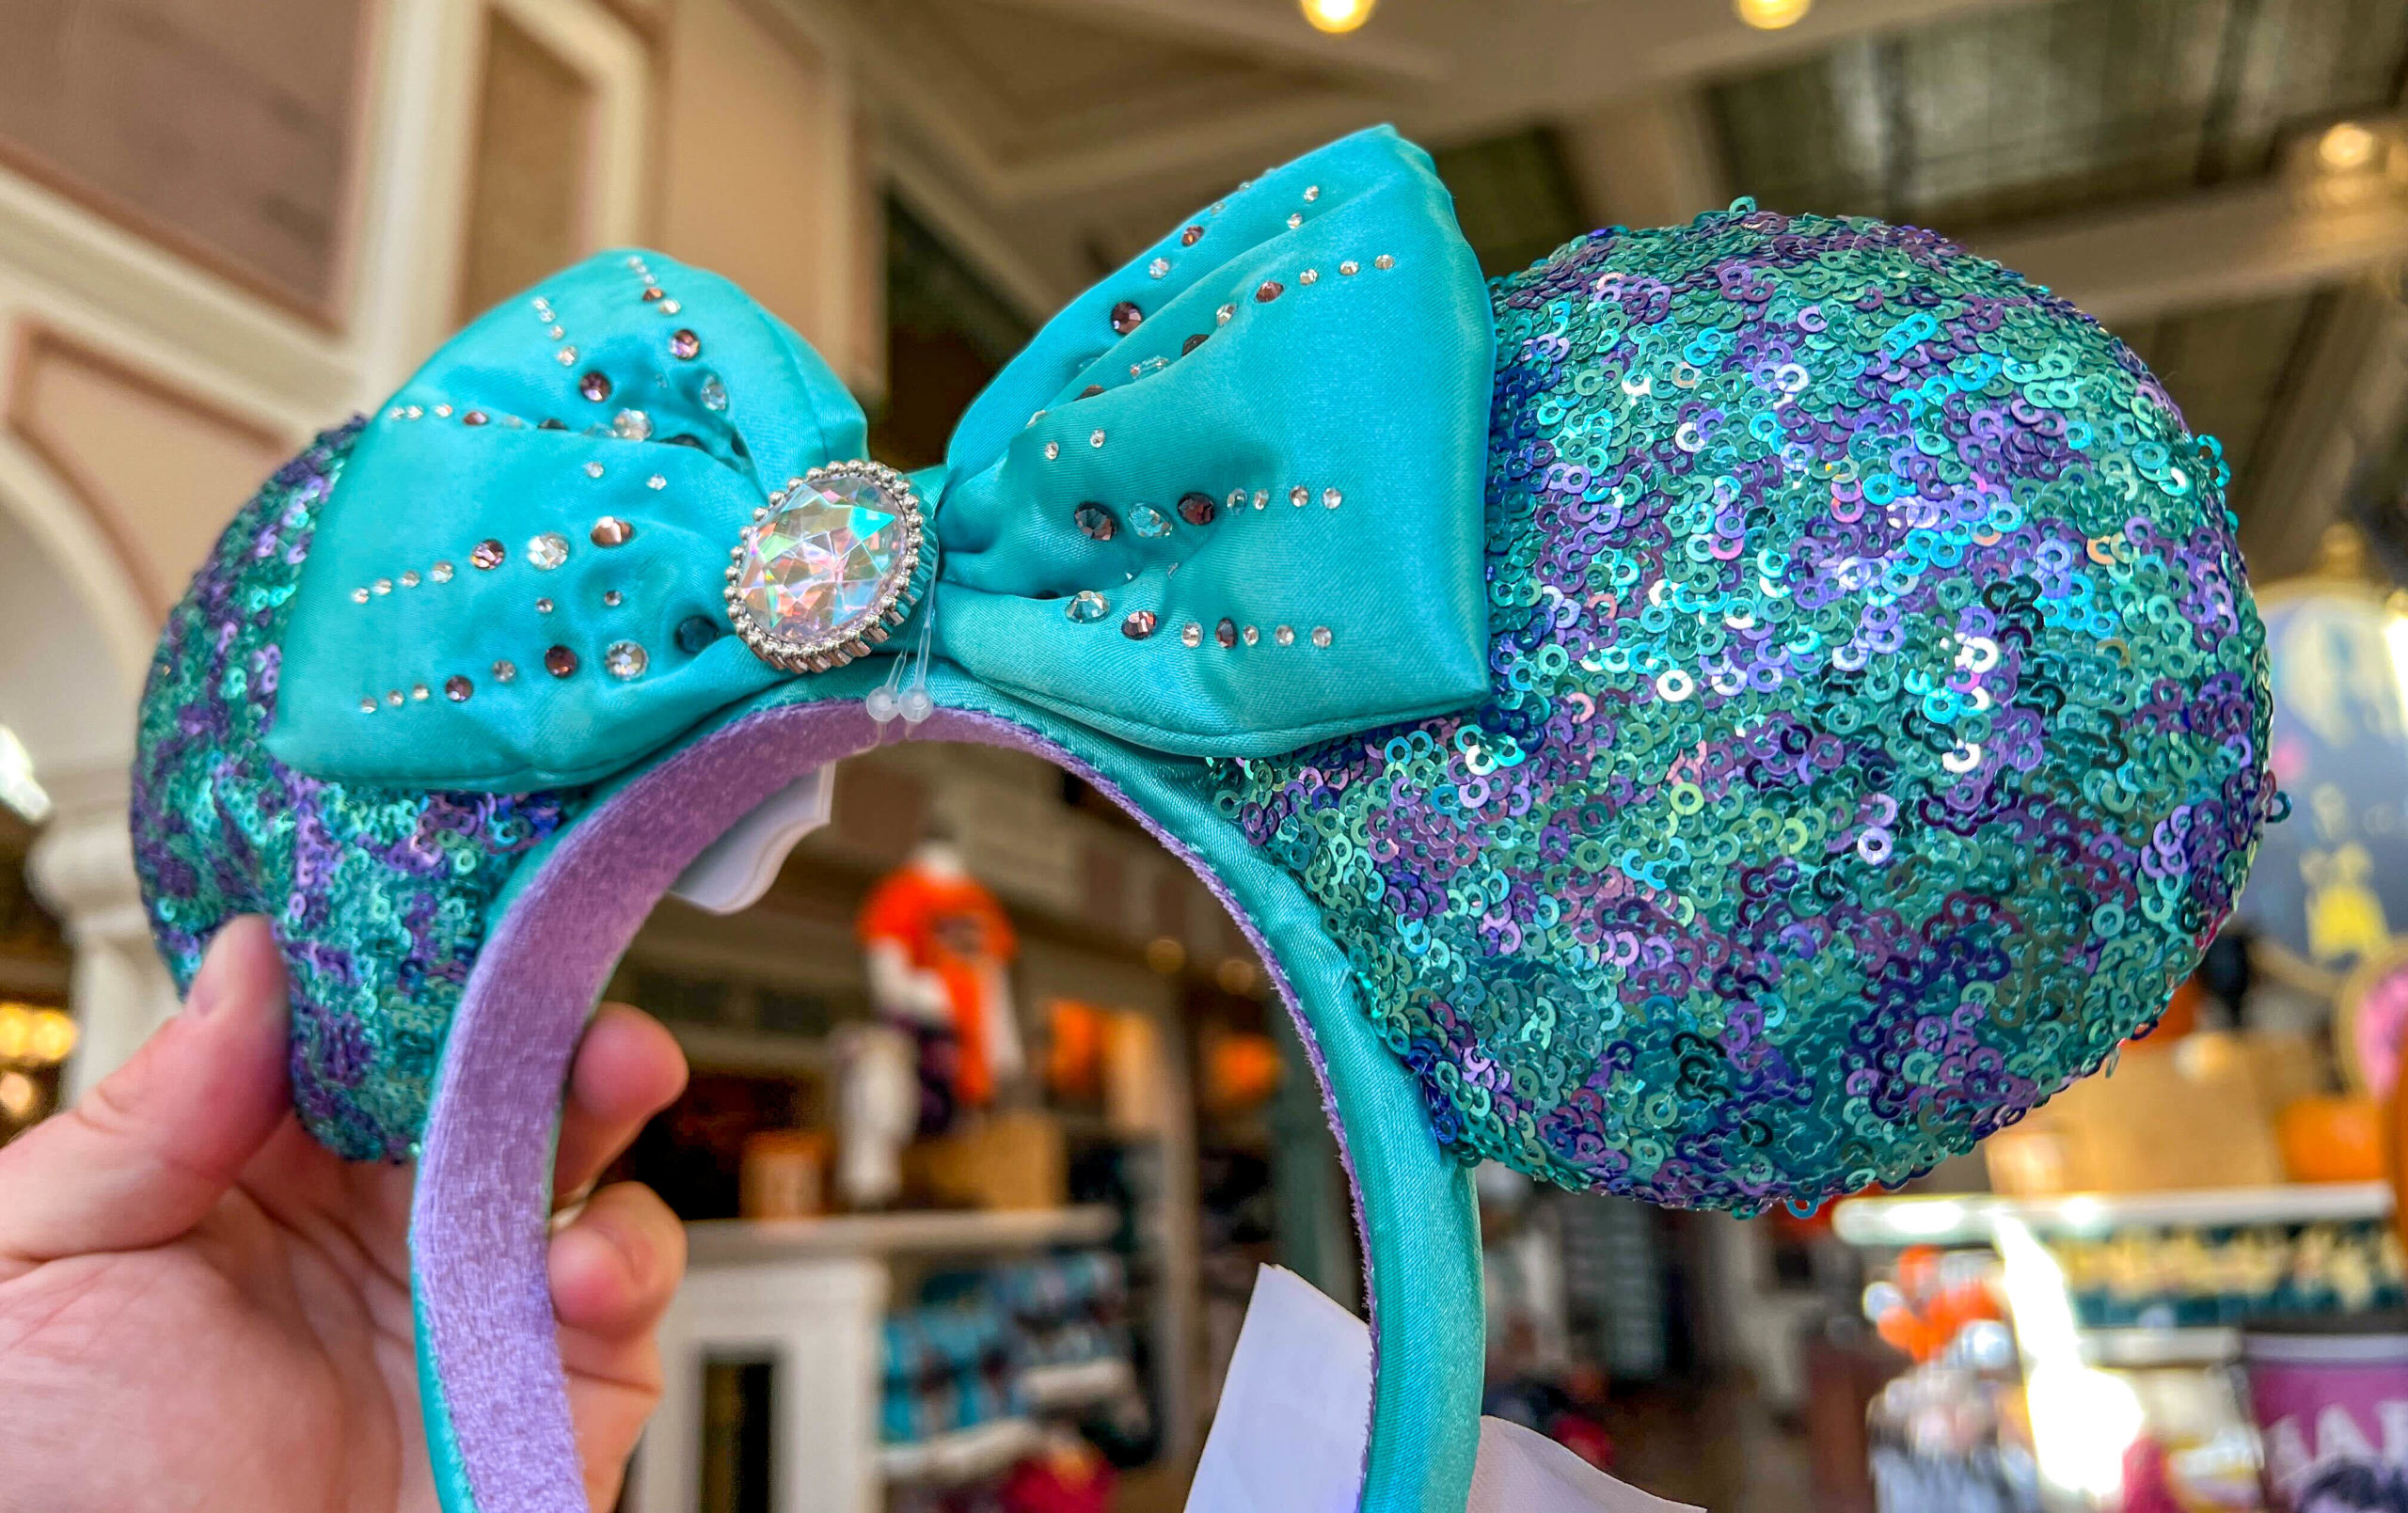 Teal and purple sequin Minnie ears